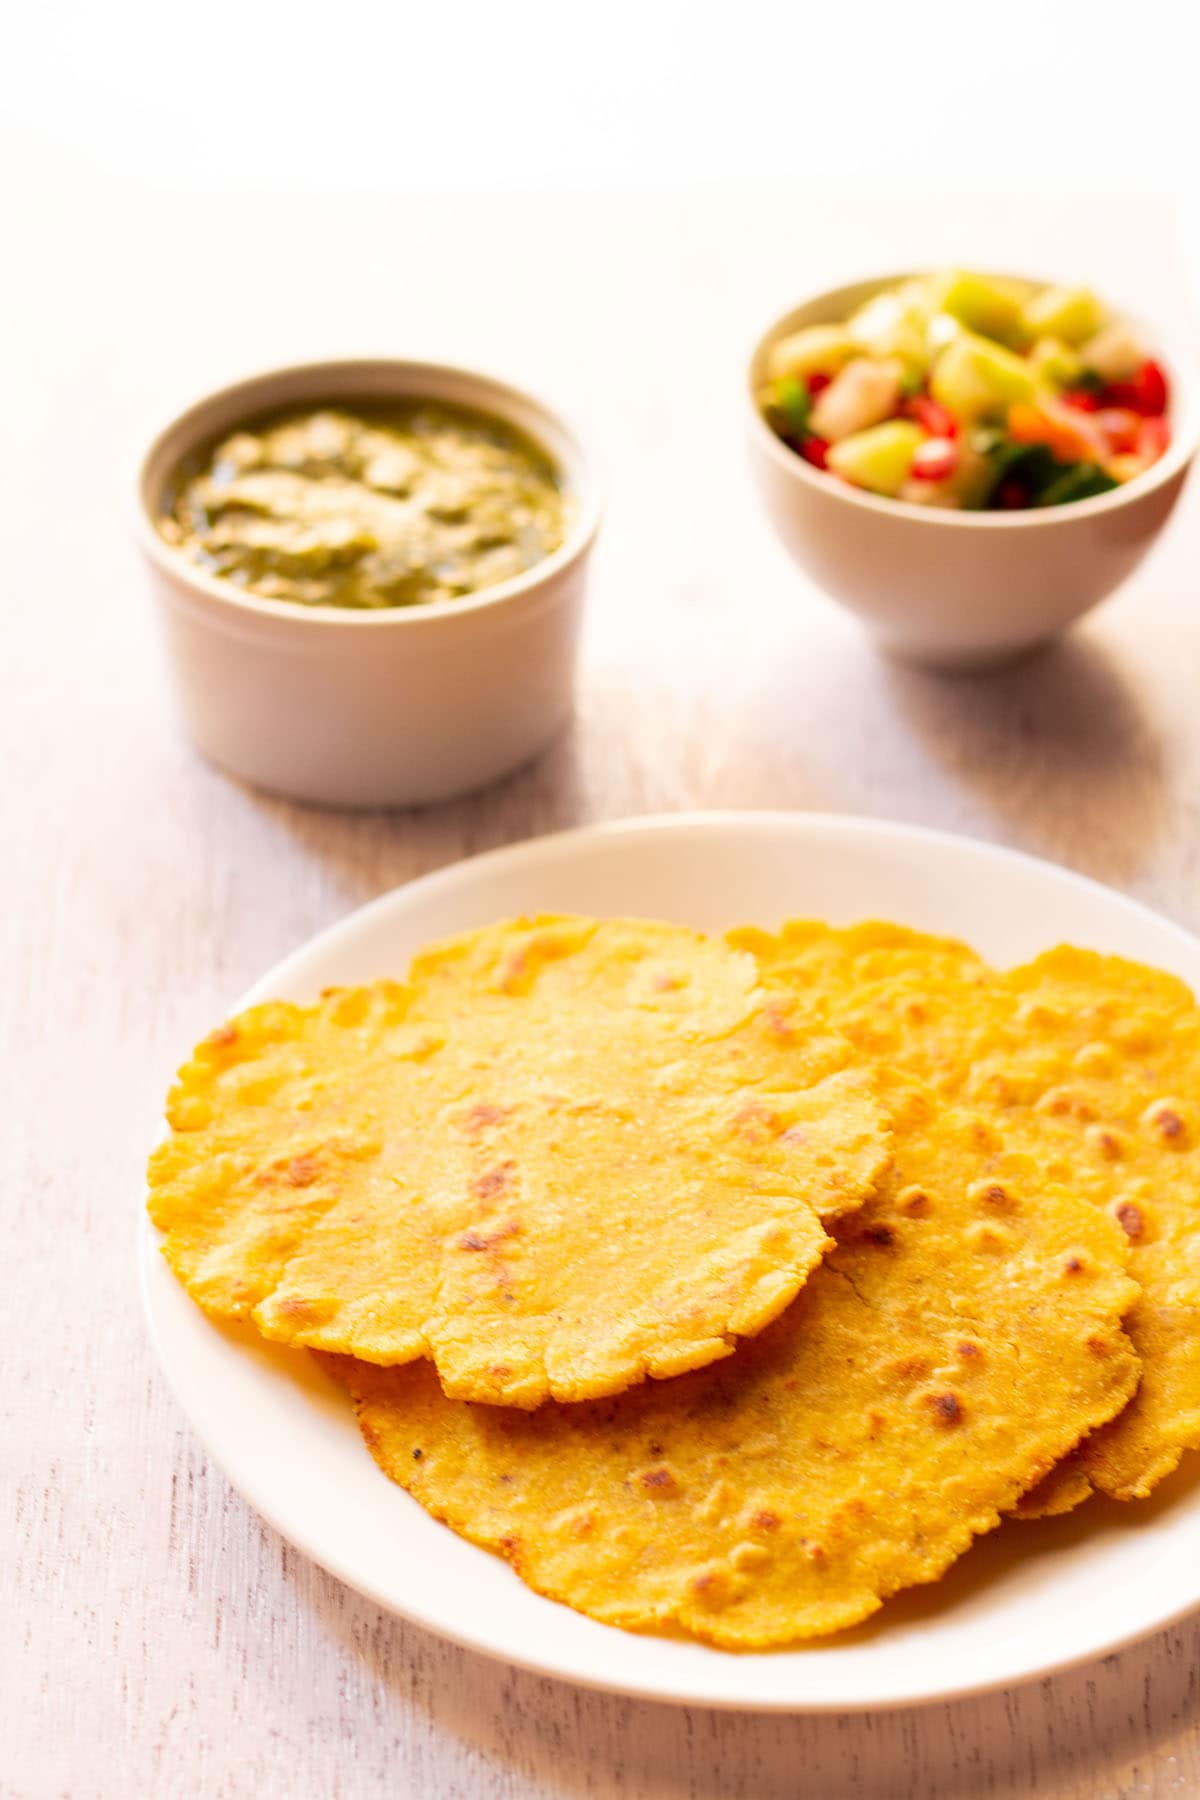 three makki di roti in a white plate with saag and a salad in white bowls placed on top side